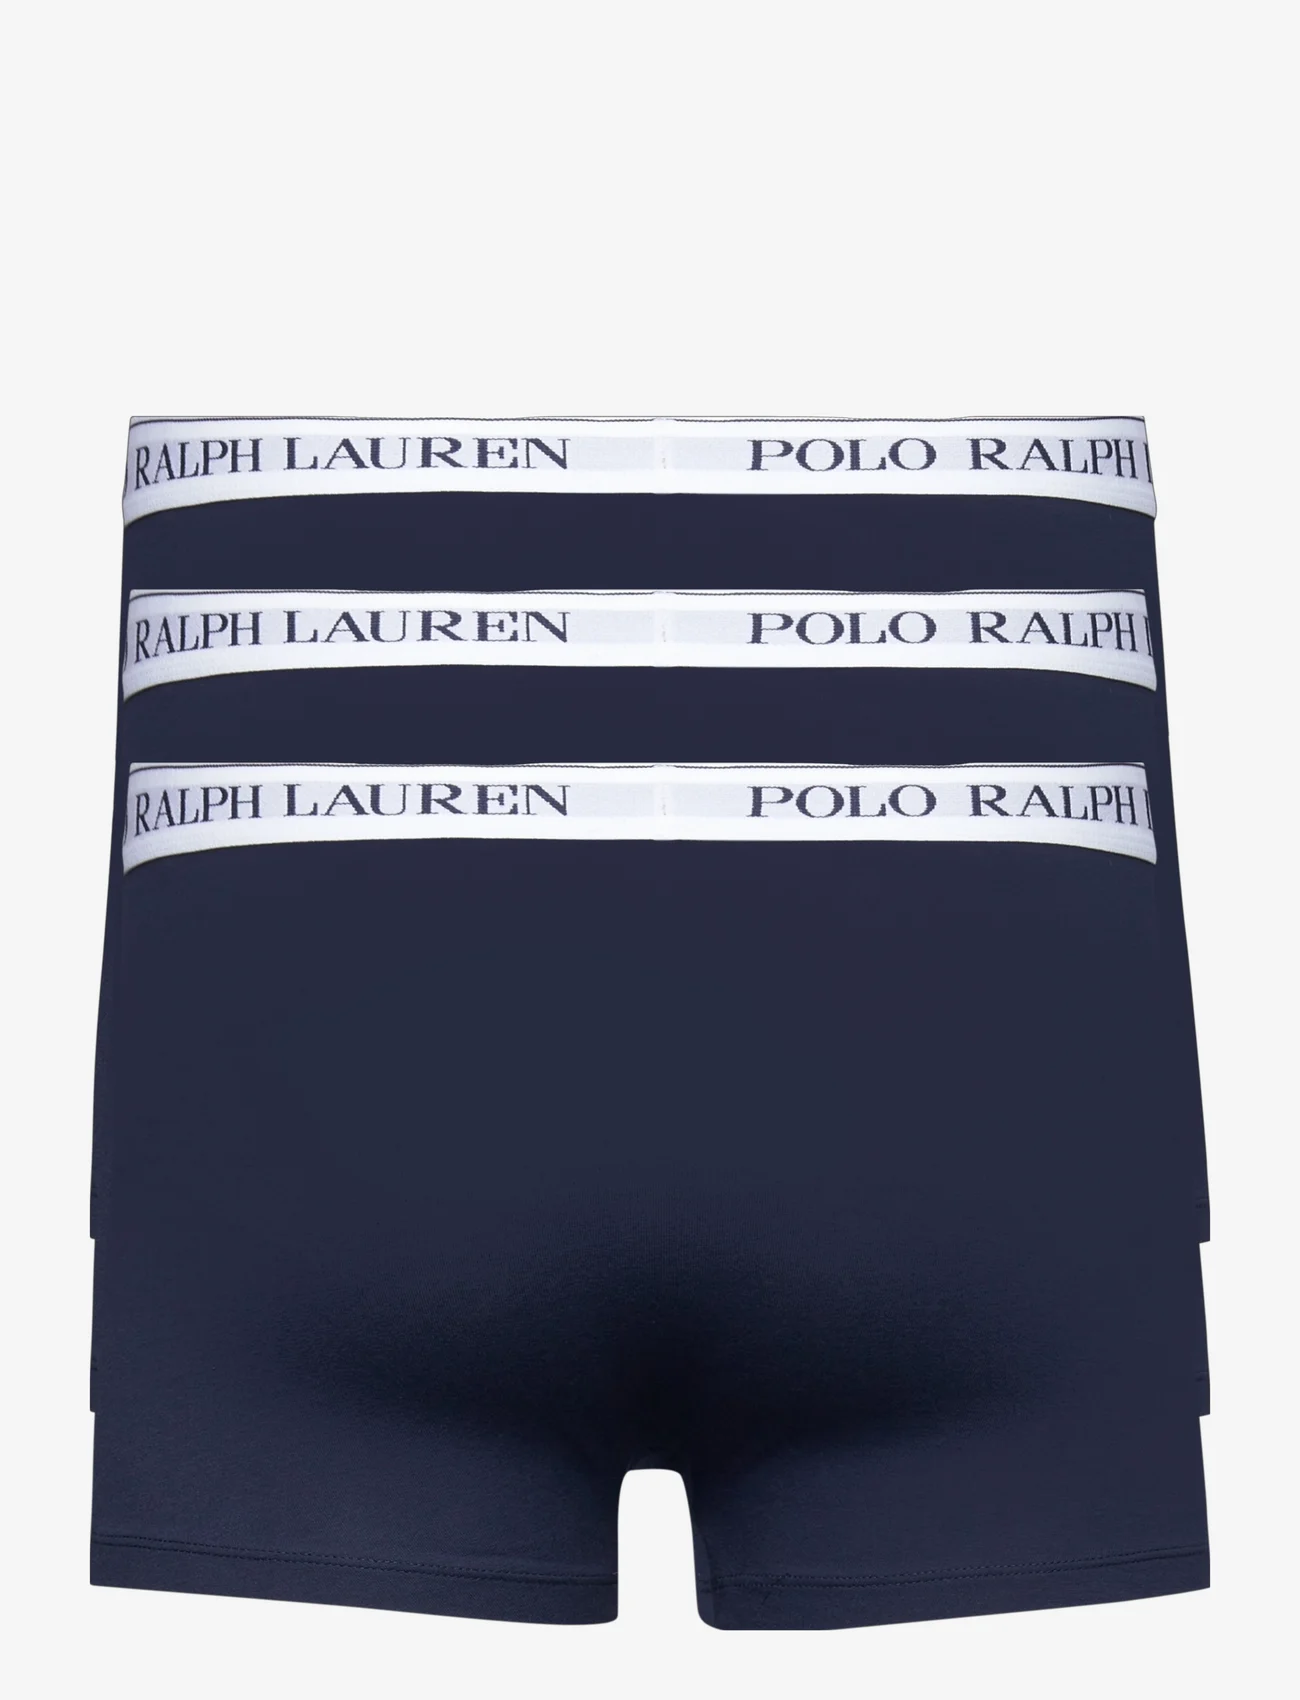 Polo Ralph Lauren Underwear - Classic Stretch-Cotton Trunk 3-Pack - multipack underpants - 3pk nvy wht/nvy w - 1